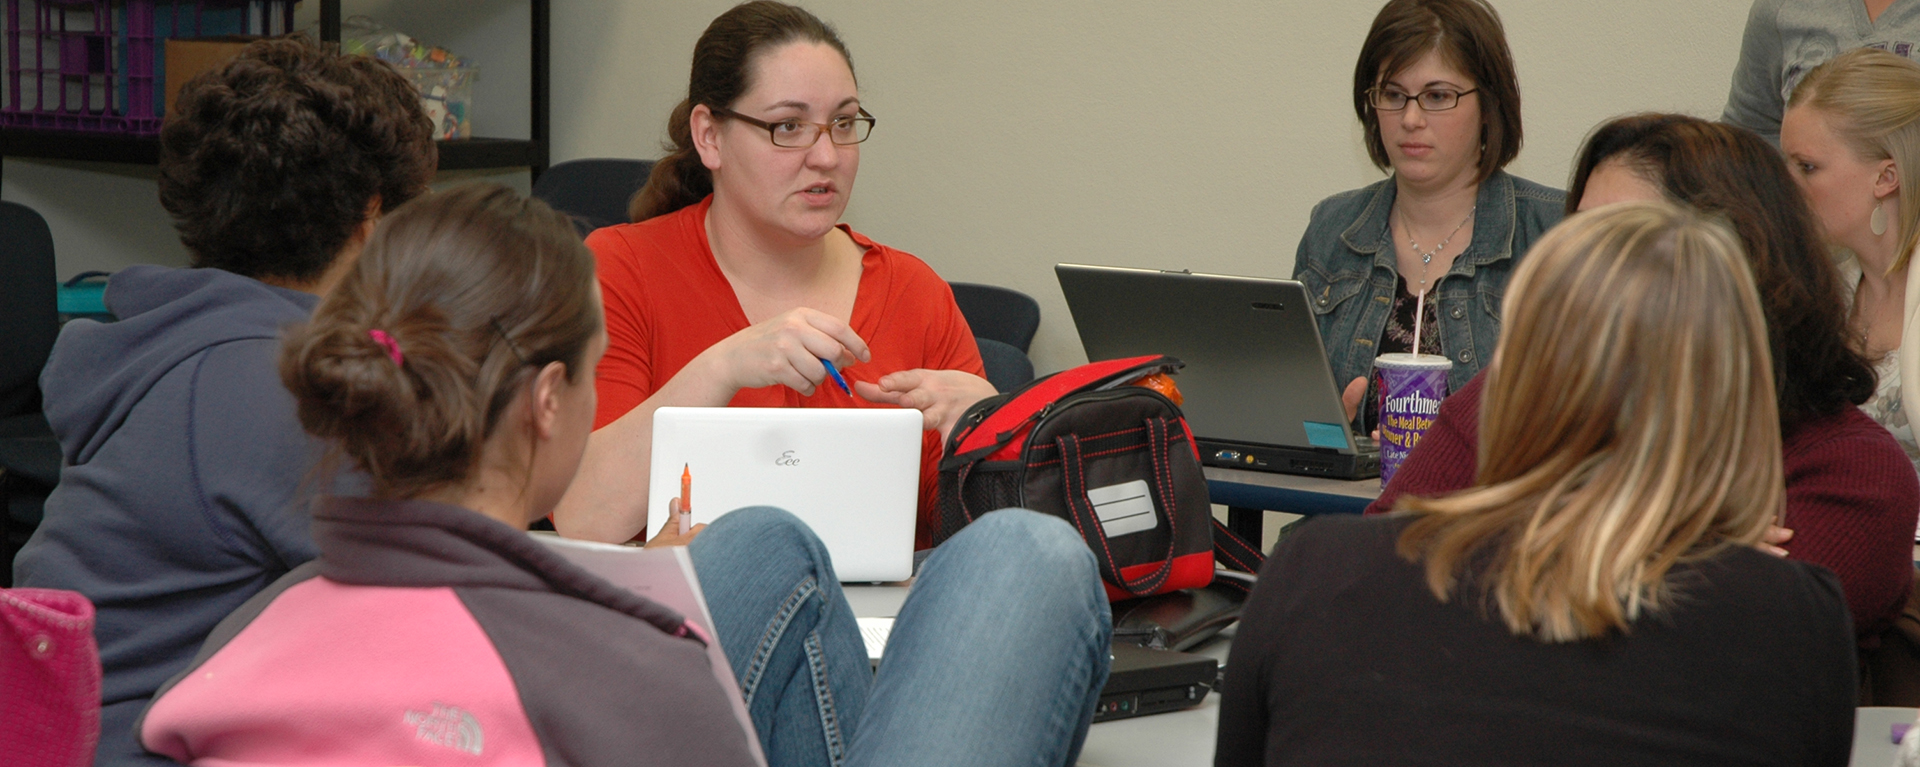 Washburn students work on a group project during a class in Petro Allied Health Center.